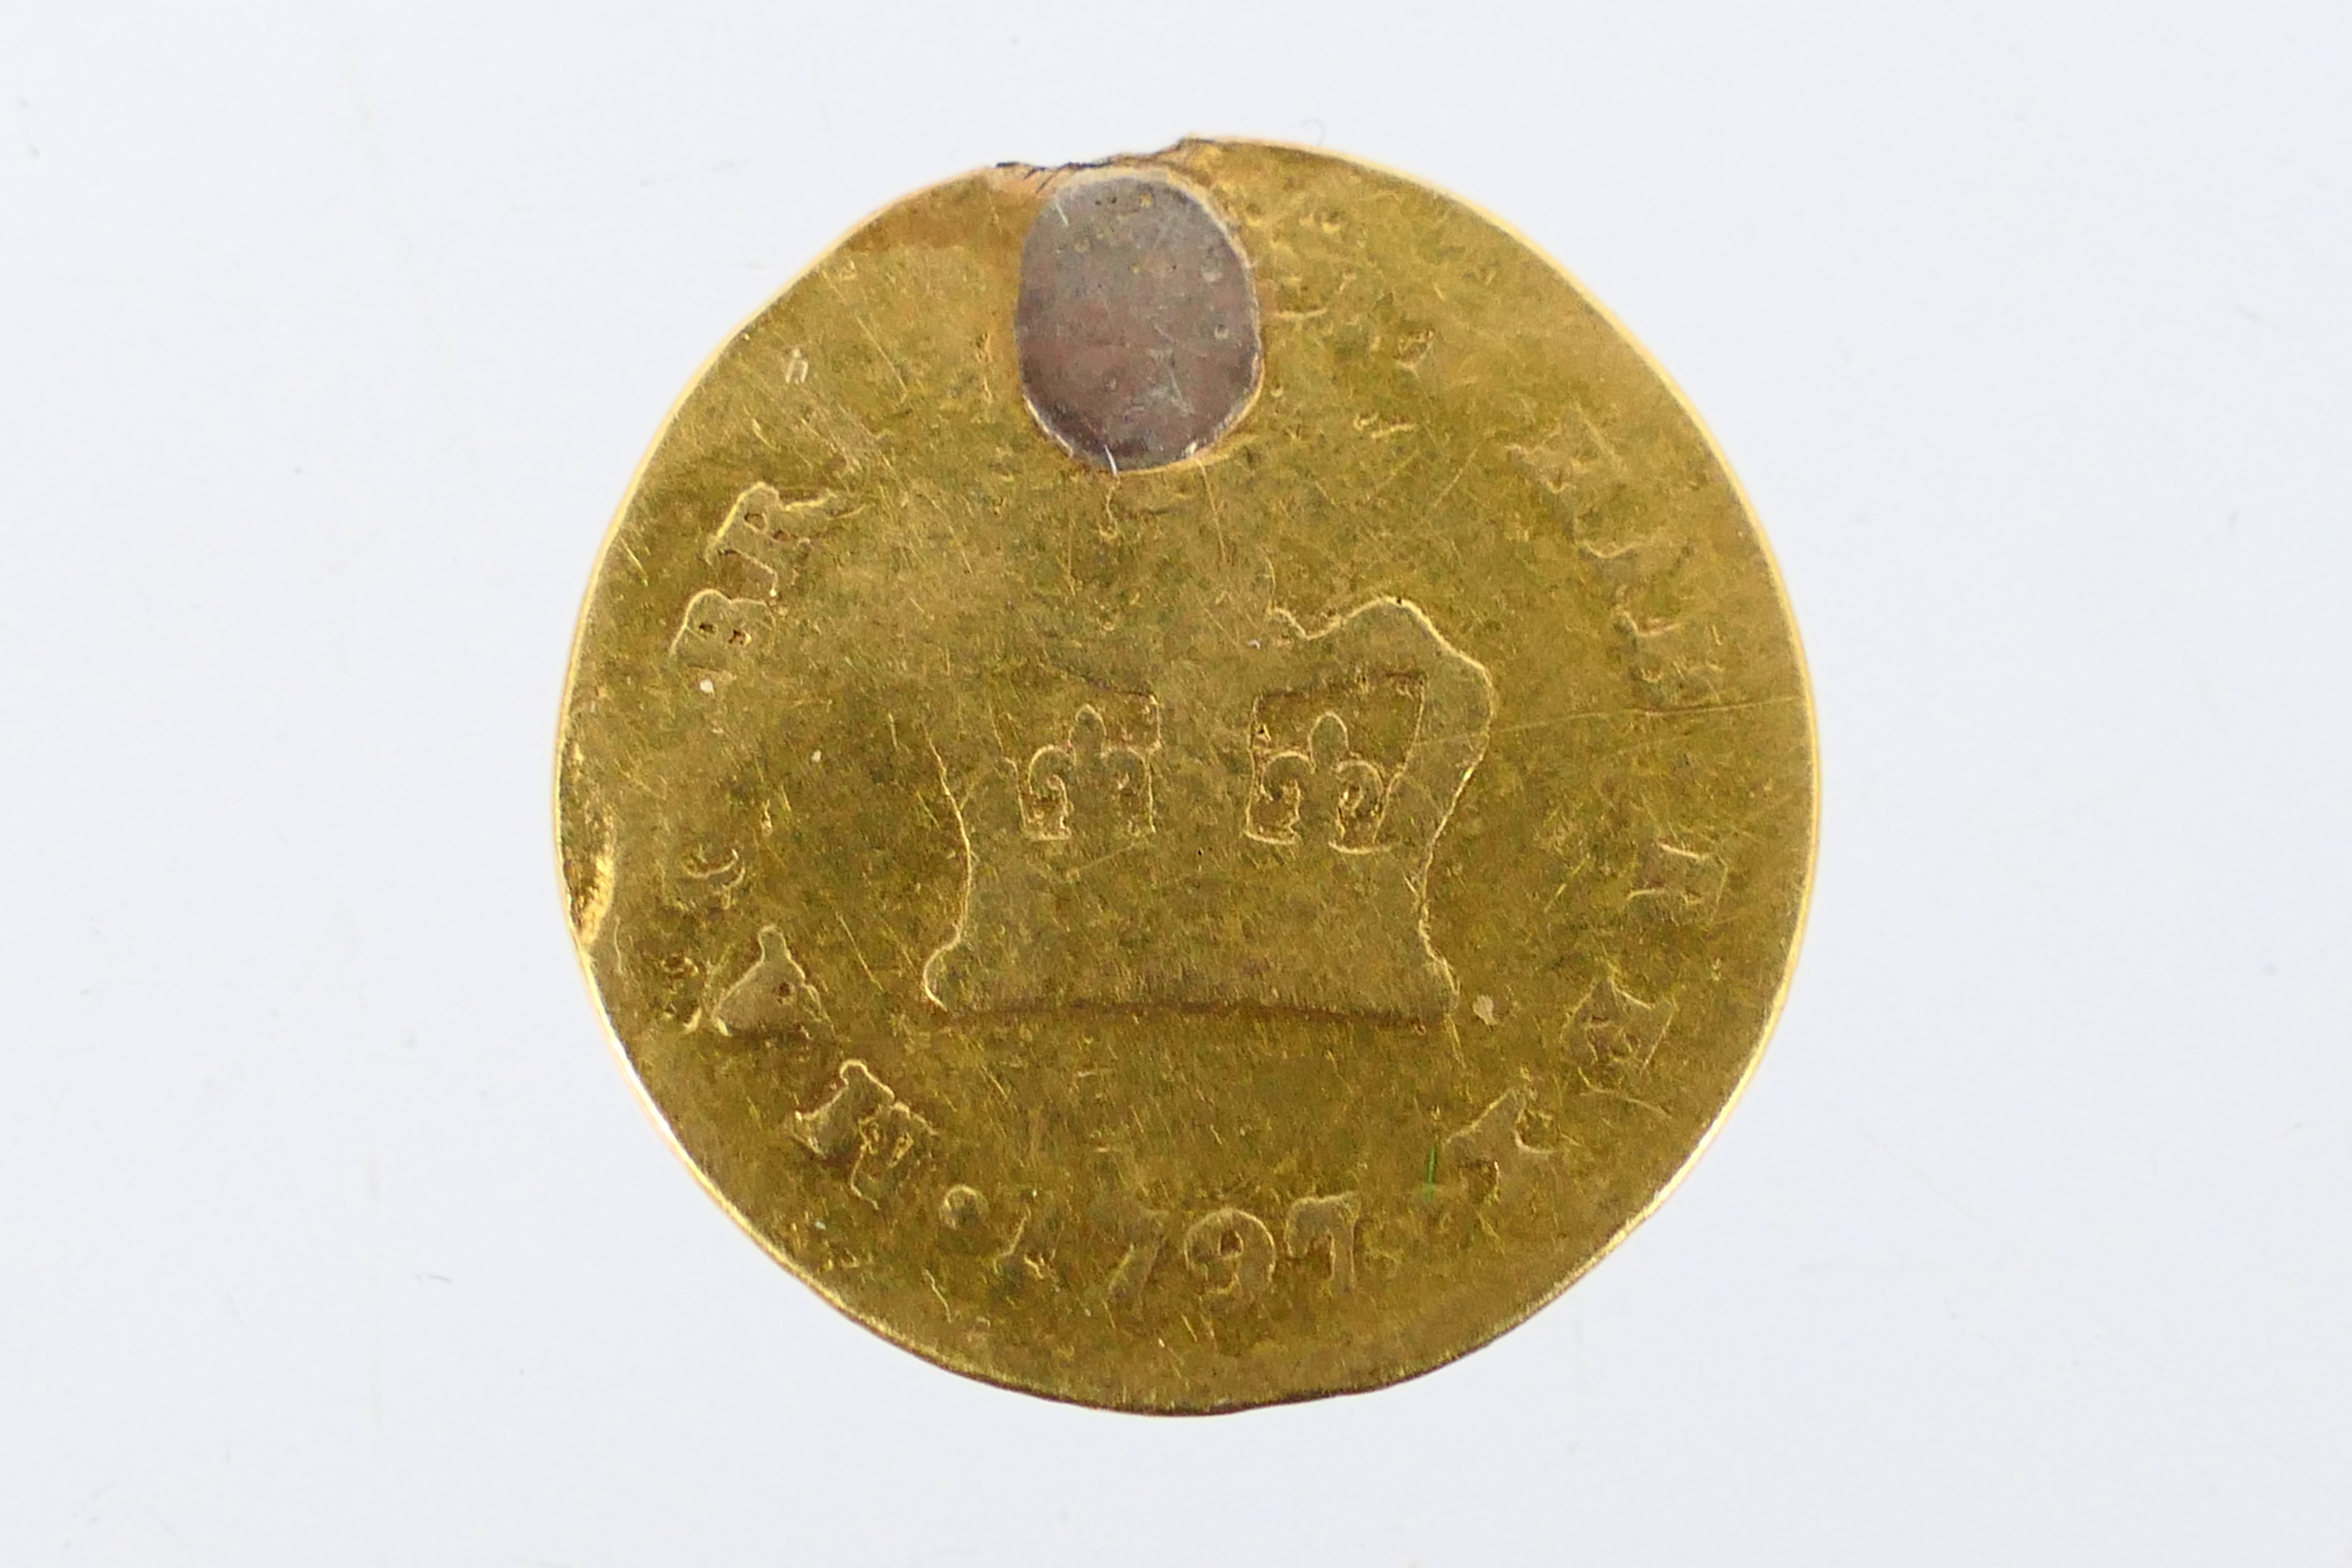 George III - Gold Third Guinea, 1797, 2.6 grams. - Image 2 of 2